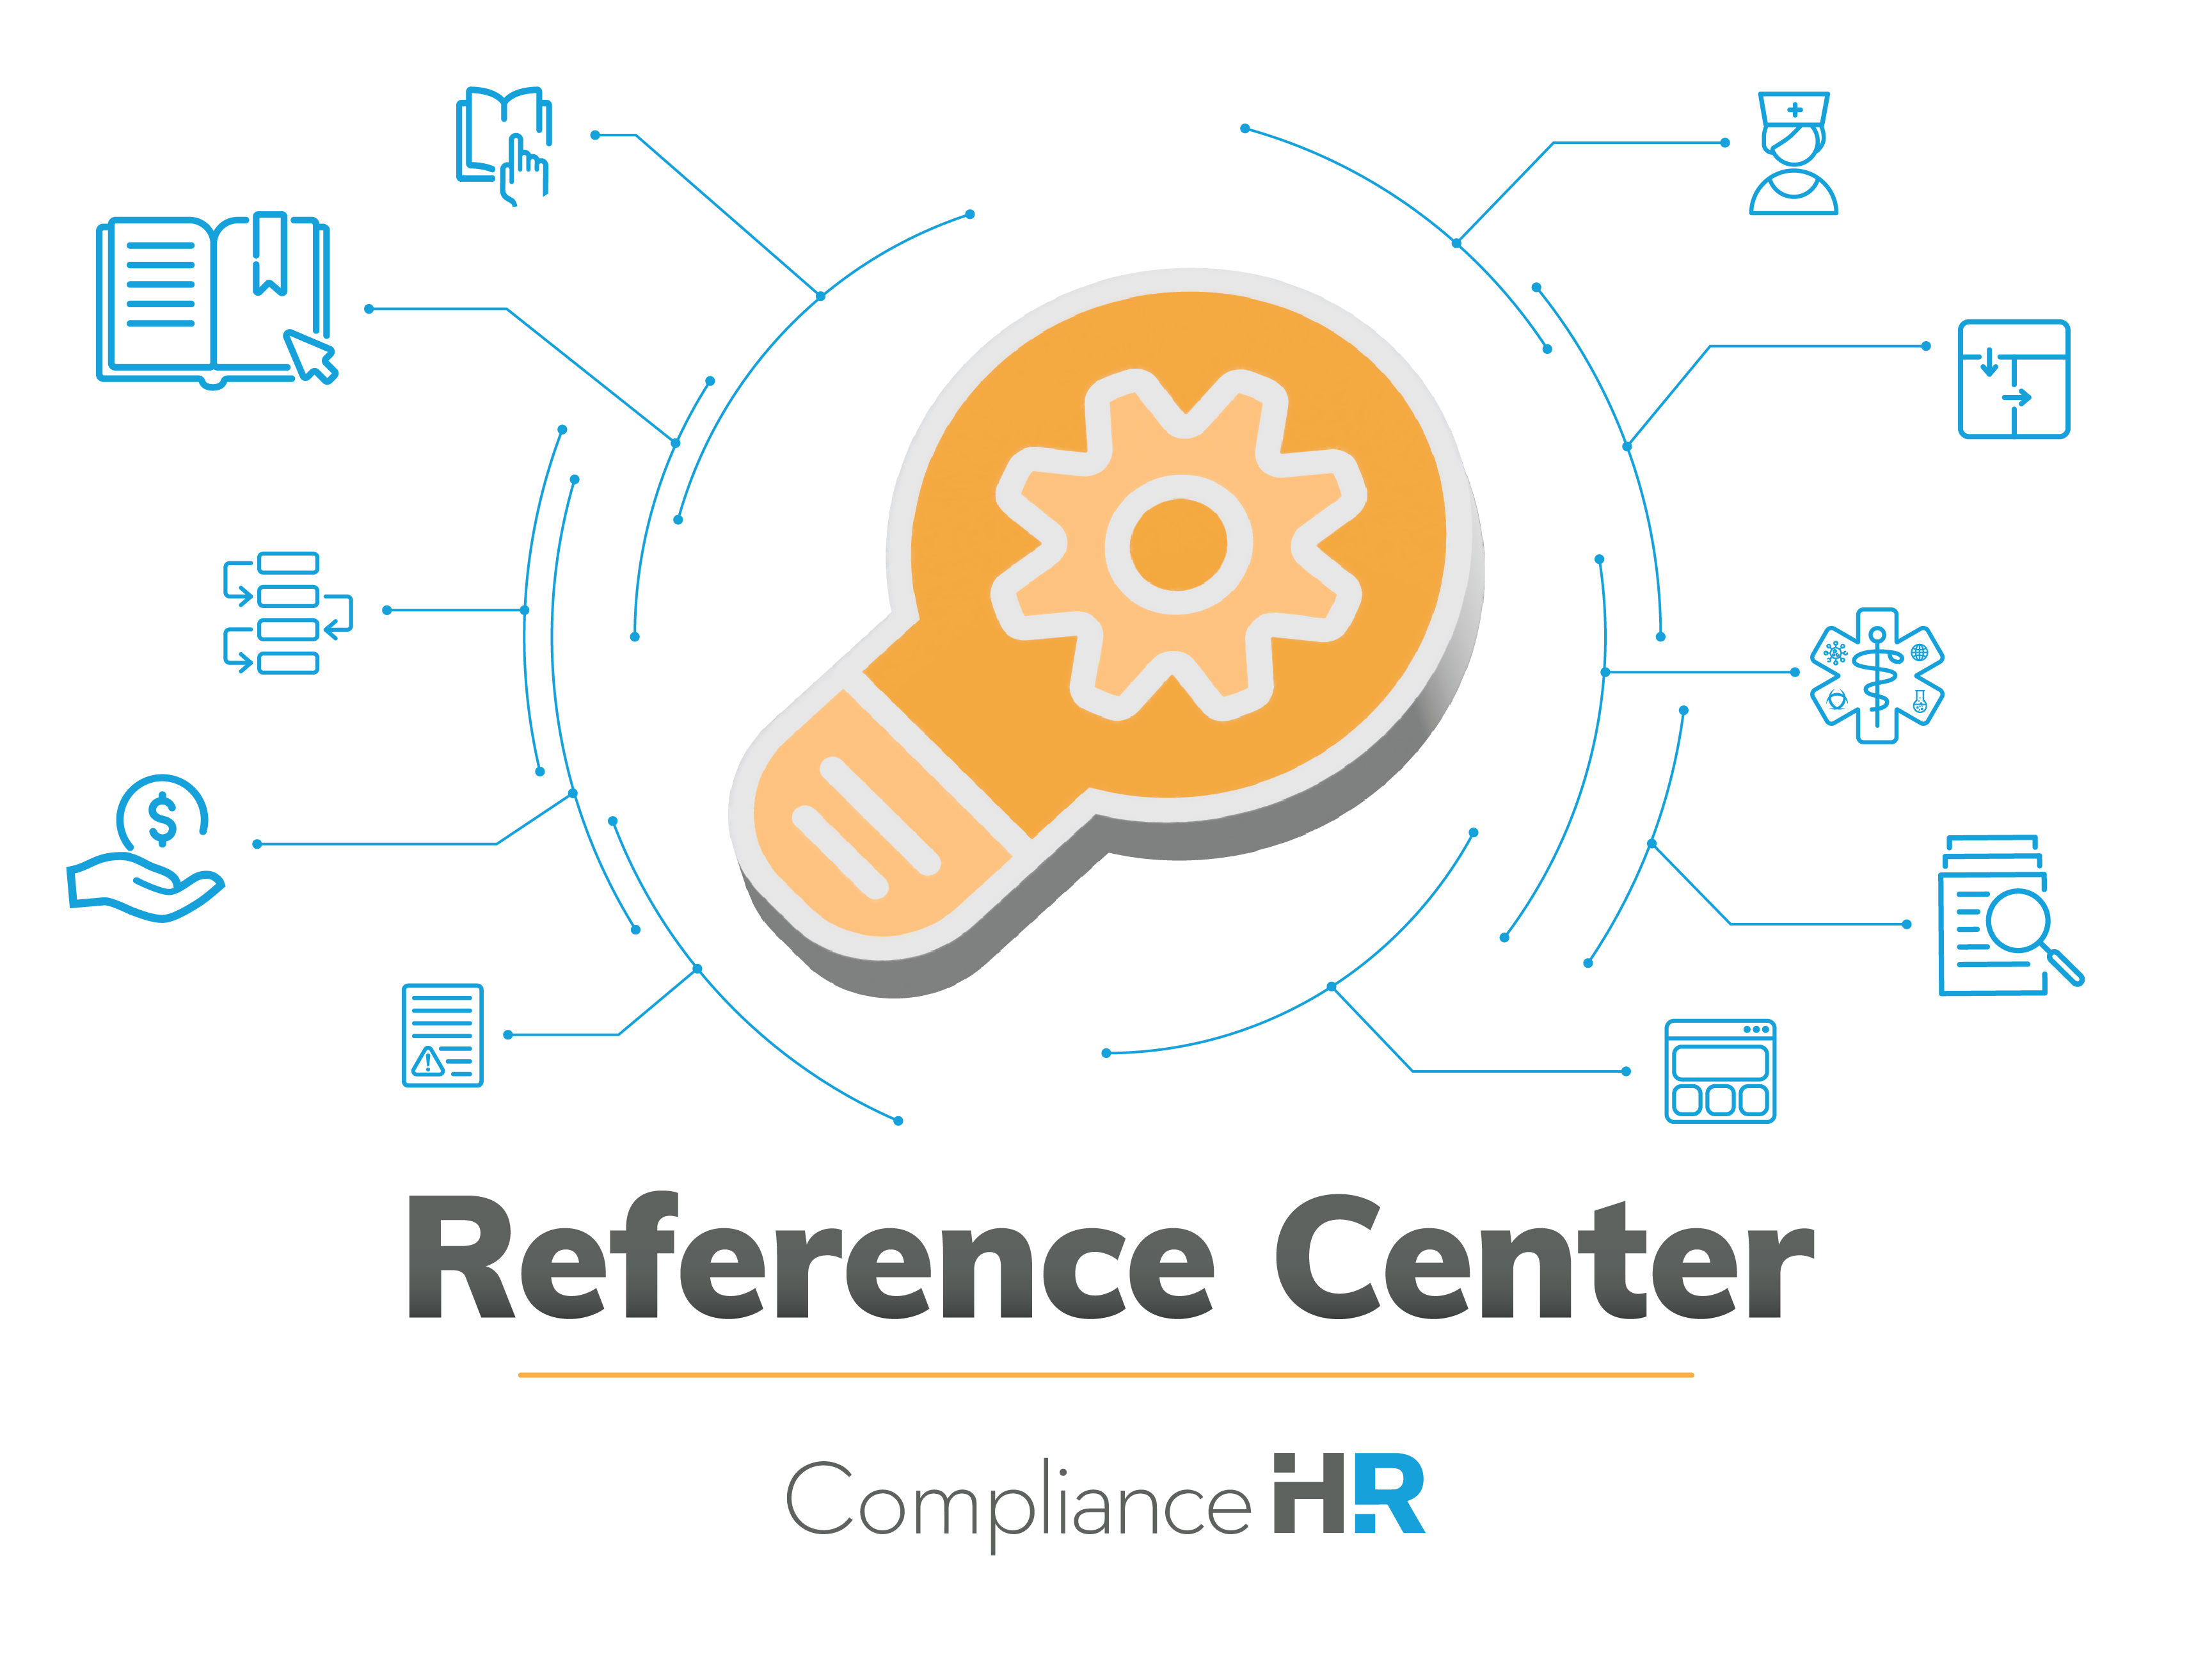 The ComplianceHR Reference Center